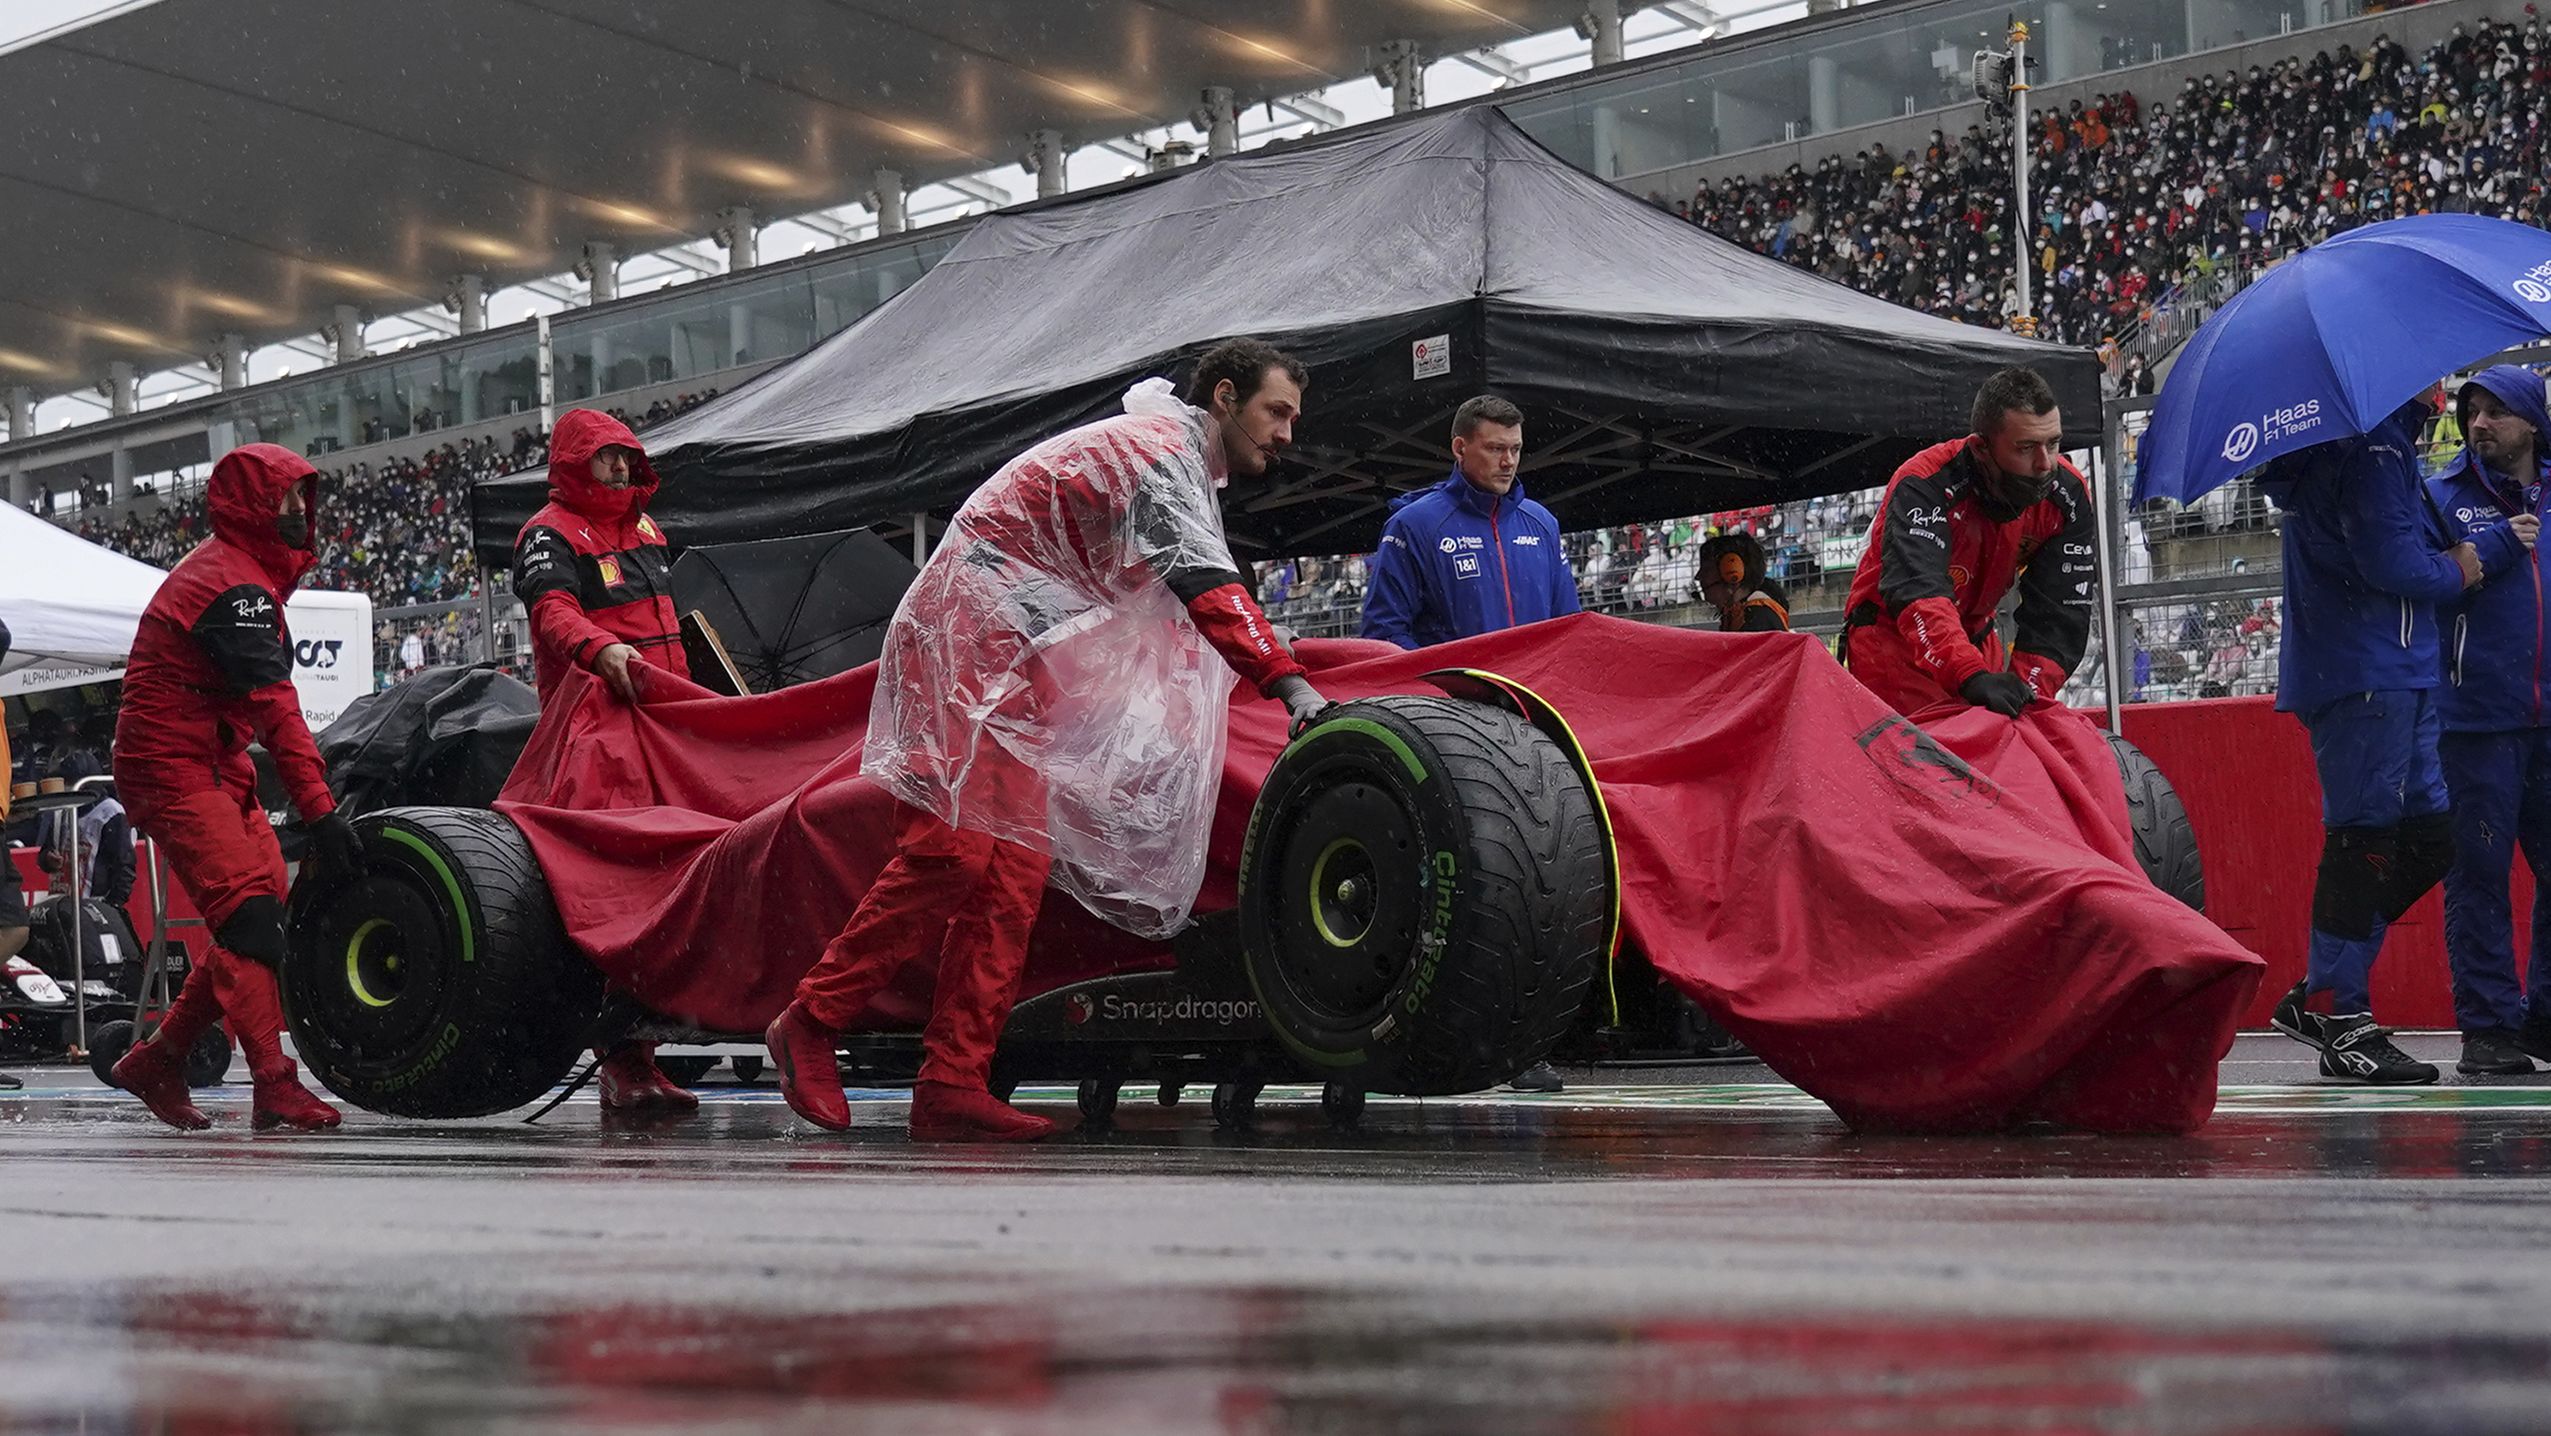 Carlos Sainz's car is carried in the pit lane during the rain delay.